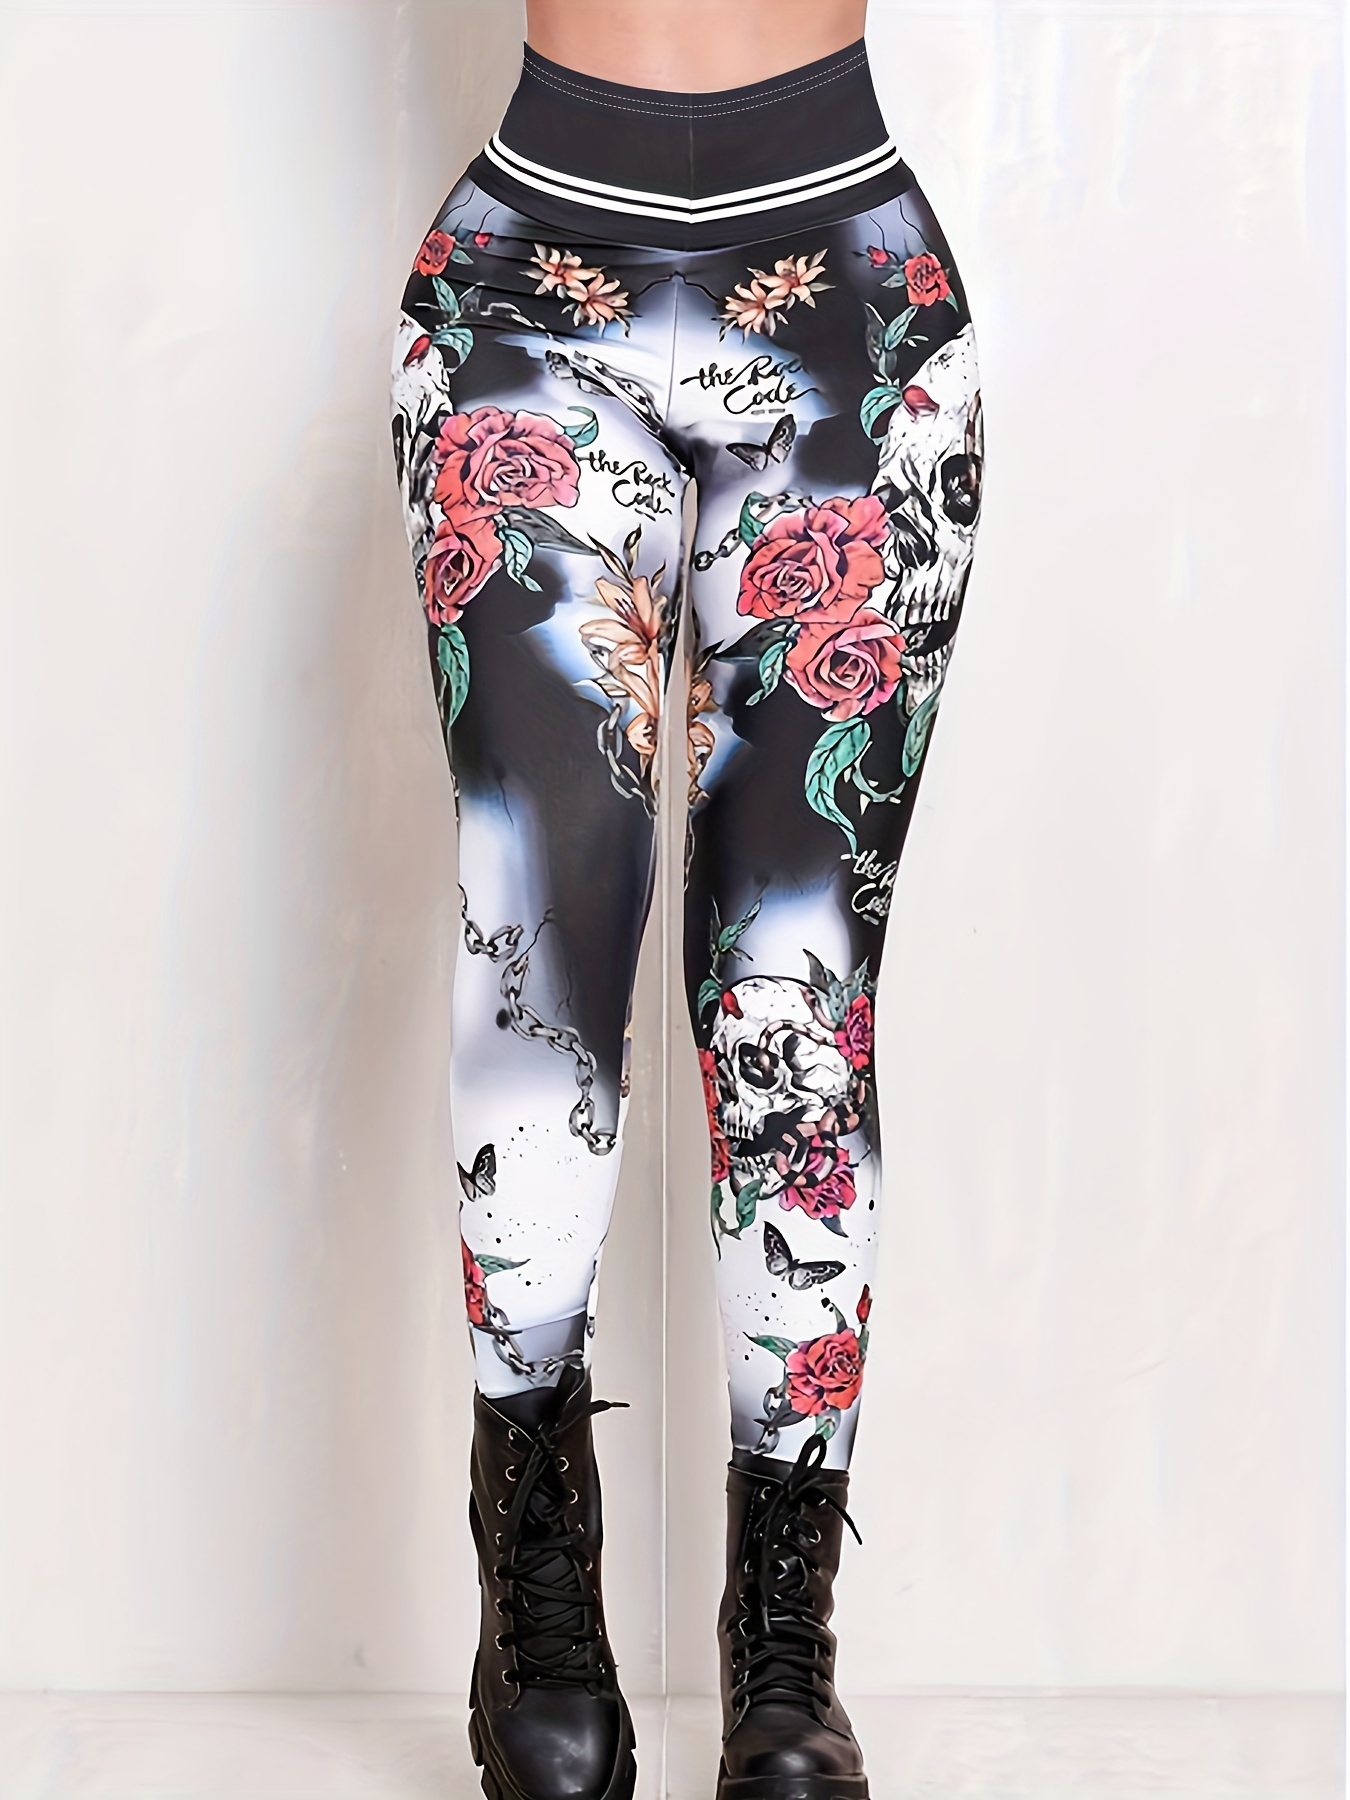 Is That The New Goth Skull & Letter Graphic Leggings ??